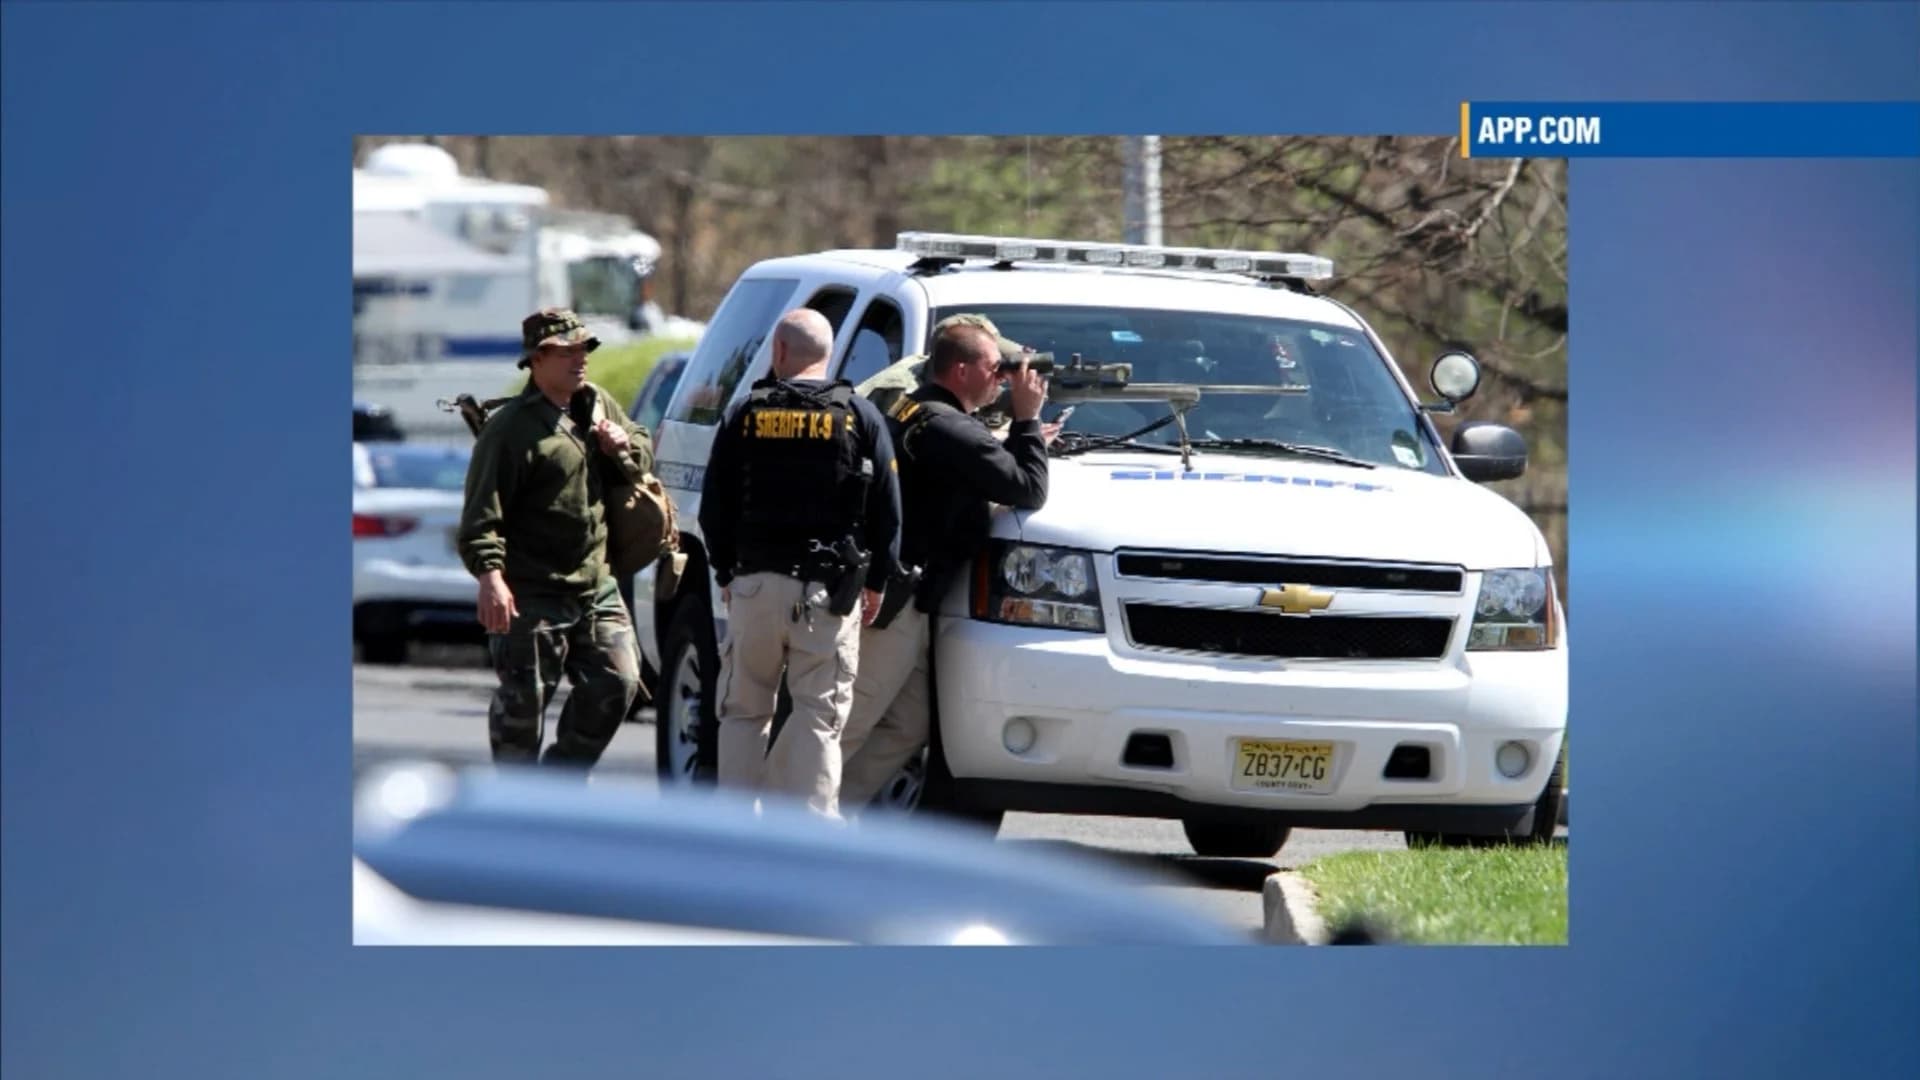 Police: Man arrested after standoff with Tinton Falls police had outstanding warrants